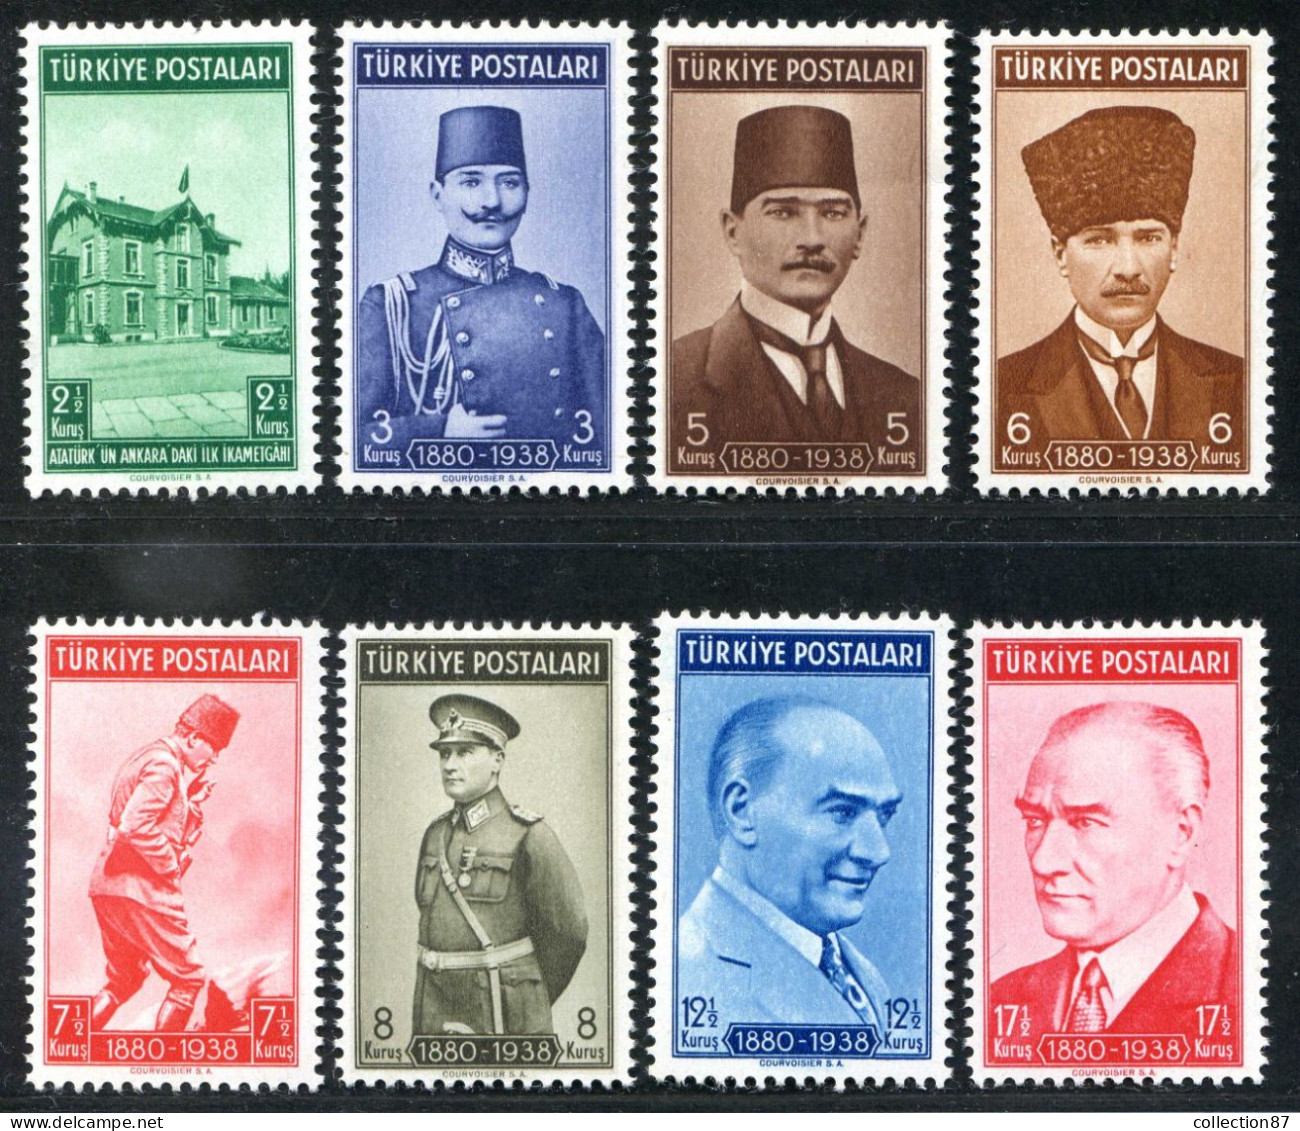 REF 091 > TURQUIE < Yv N° 922 à 929 * * Neuf Luxe Dos Visible MNH * * < Président Ataturk - Nuovi